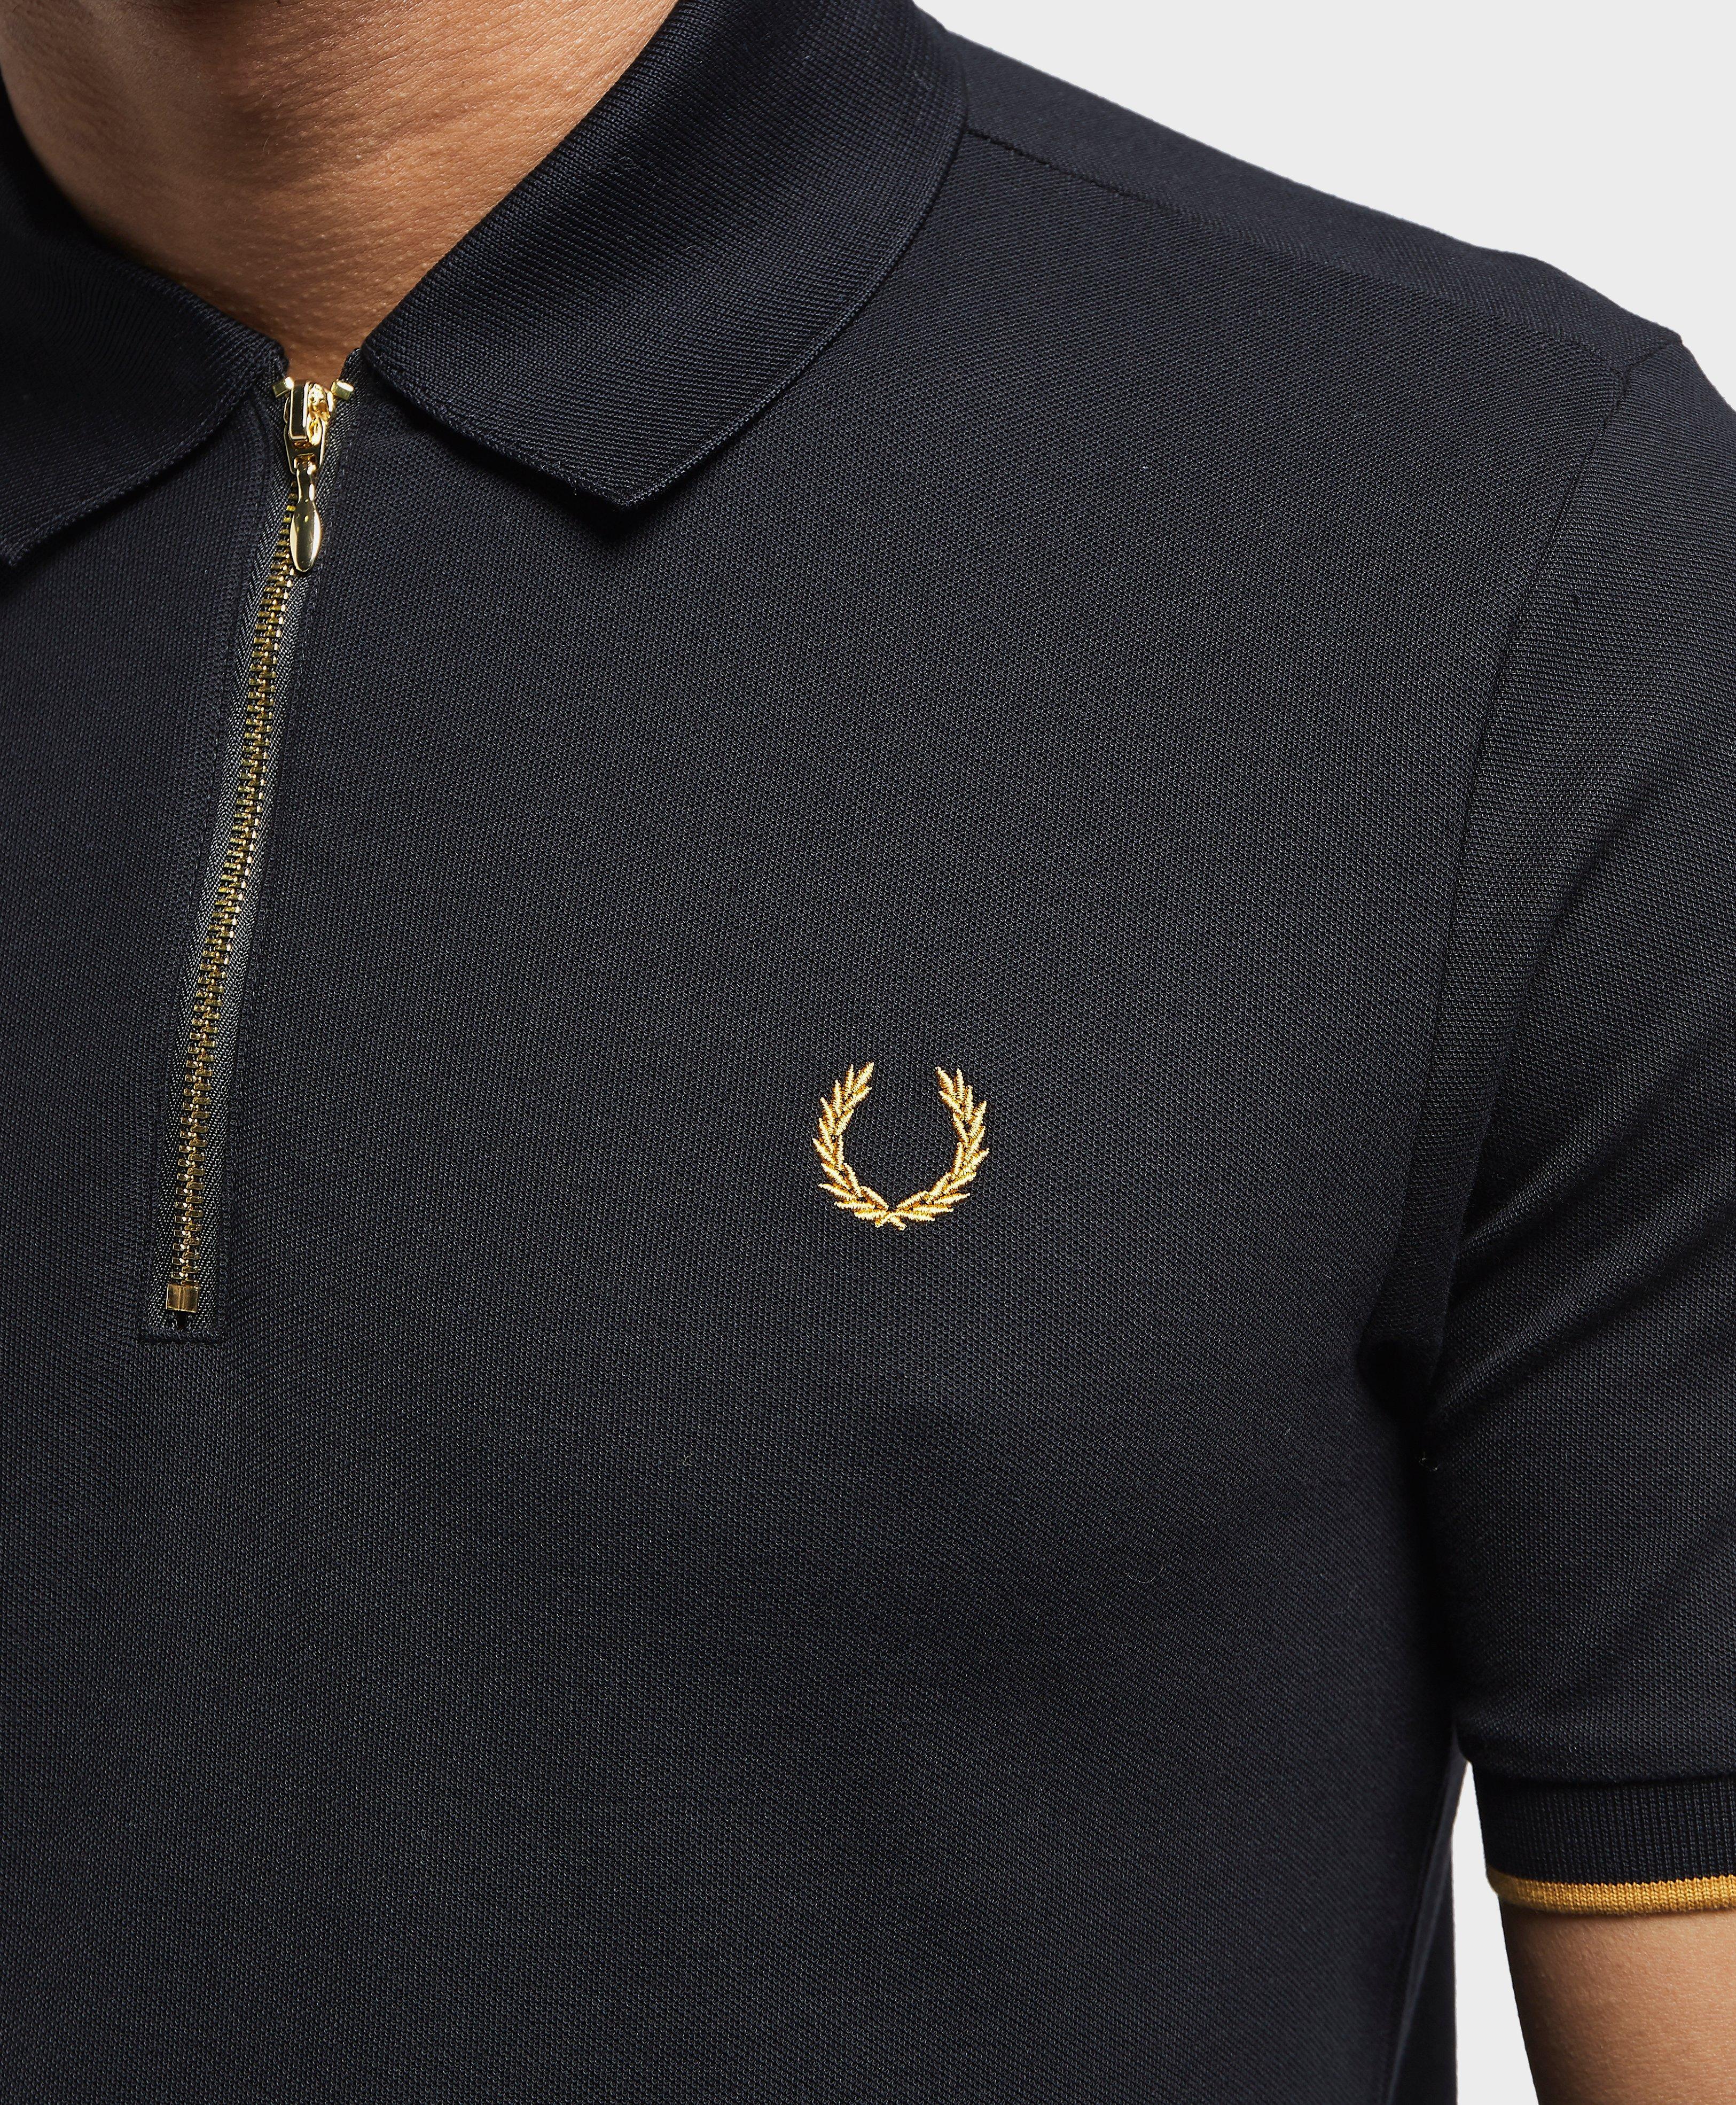 Fred Perry X Miles Kane Short Sleeve Zip Polo Shirt in Black for Men | Lyst